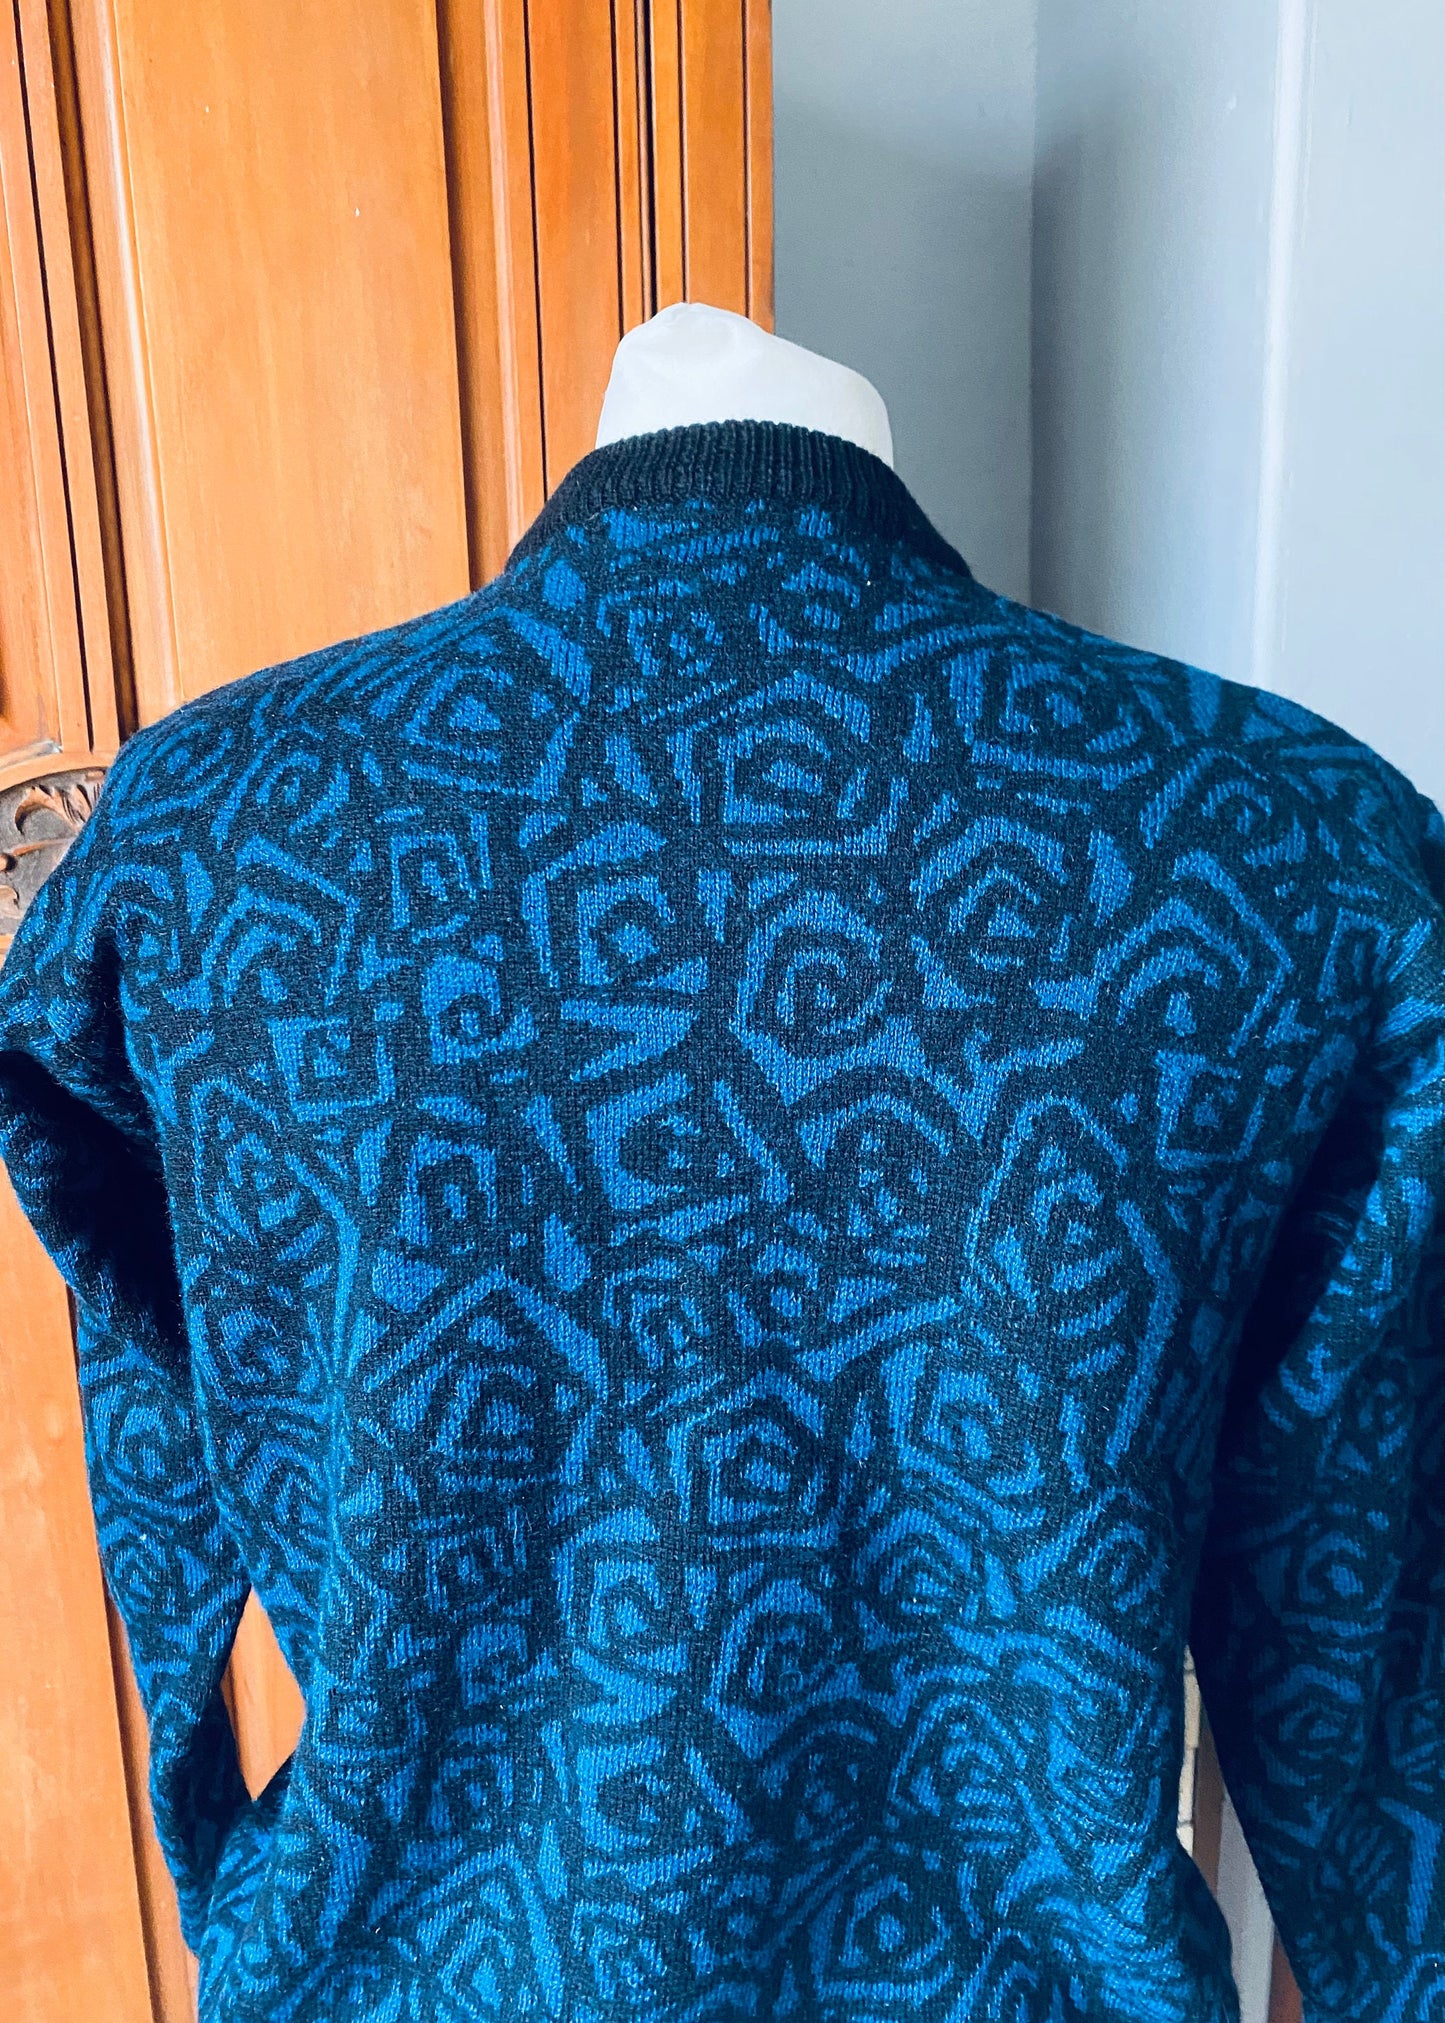 80s blue and black graphic print crew neck jumper. Approx UK size 10-14